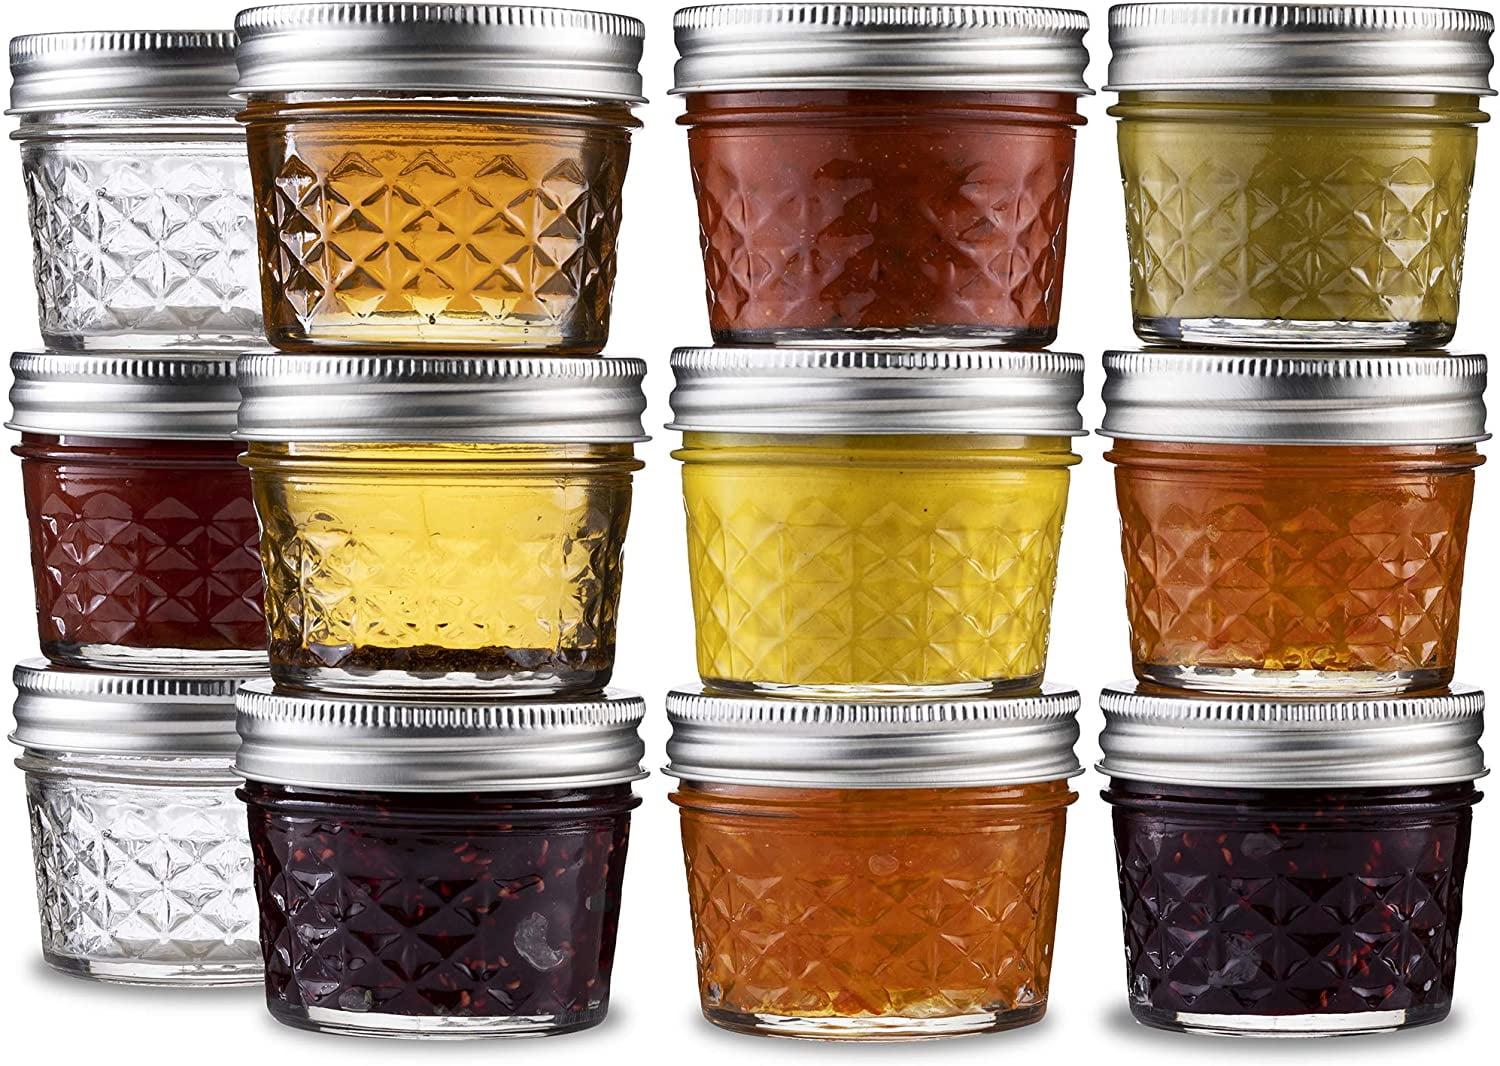 24 Pack 8 oz Mason Jars with Lids and Bands, Small Regular Mouth Glass  Canning jars with Airtight Lids, Jelly Jars, Jam Jars, Ideal for Canning